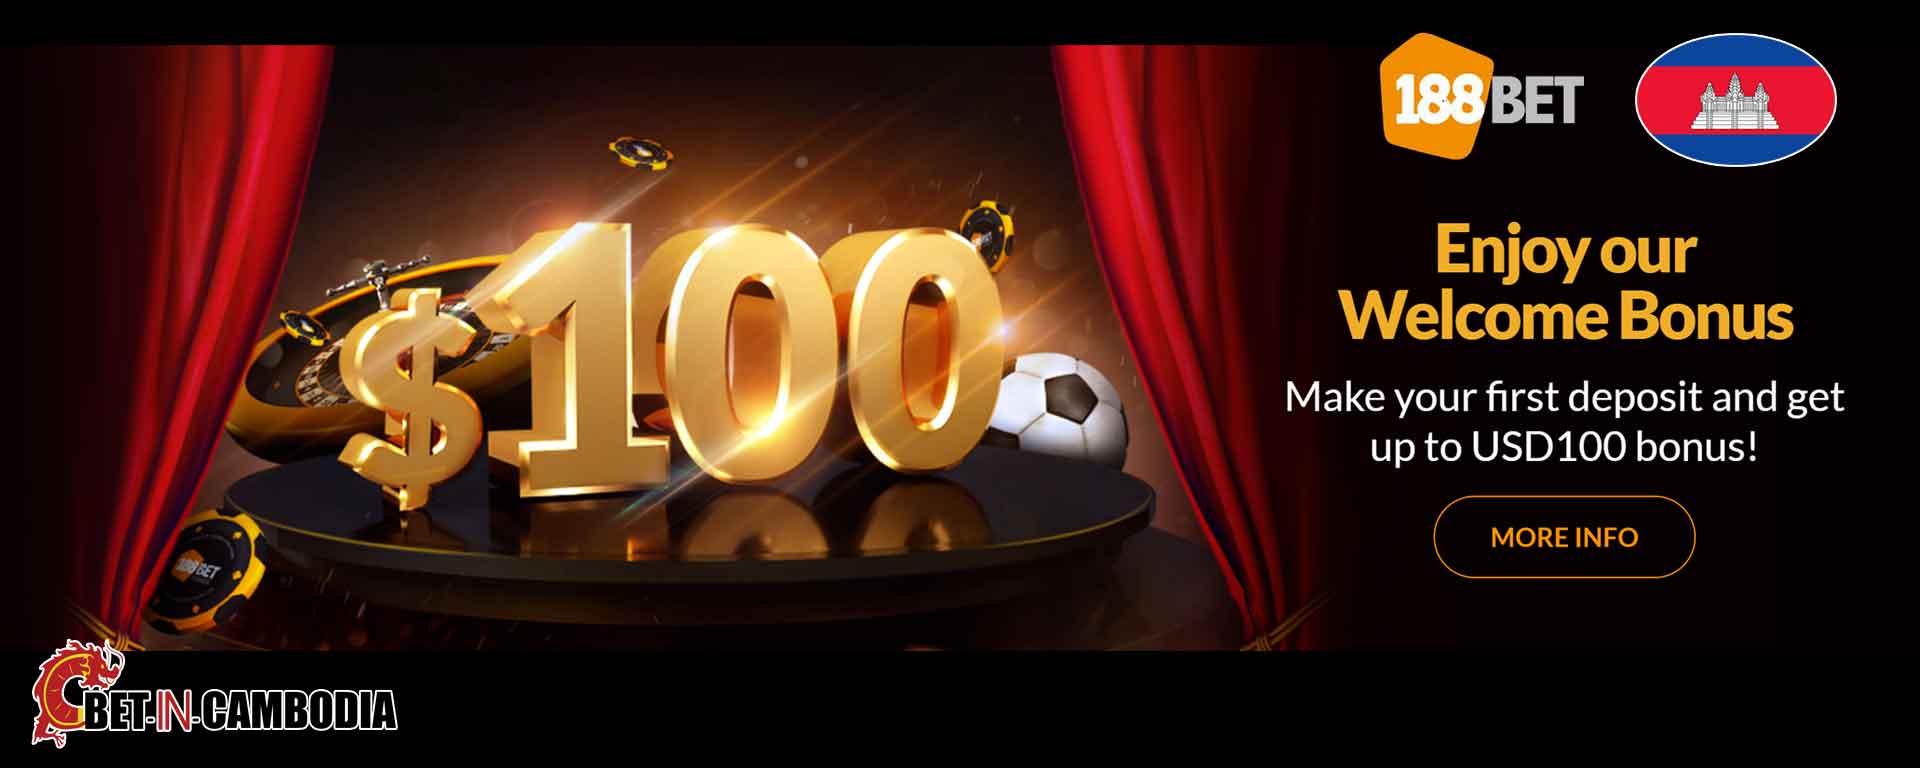 Get now your Welcome Bonus from 188BET Cambodia and bet on the cambodian premier league